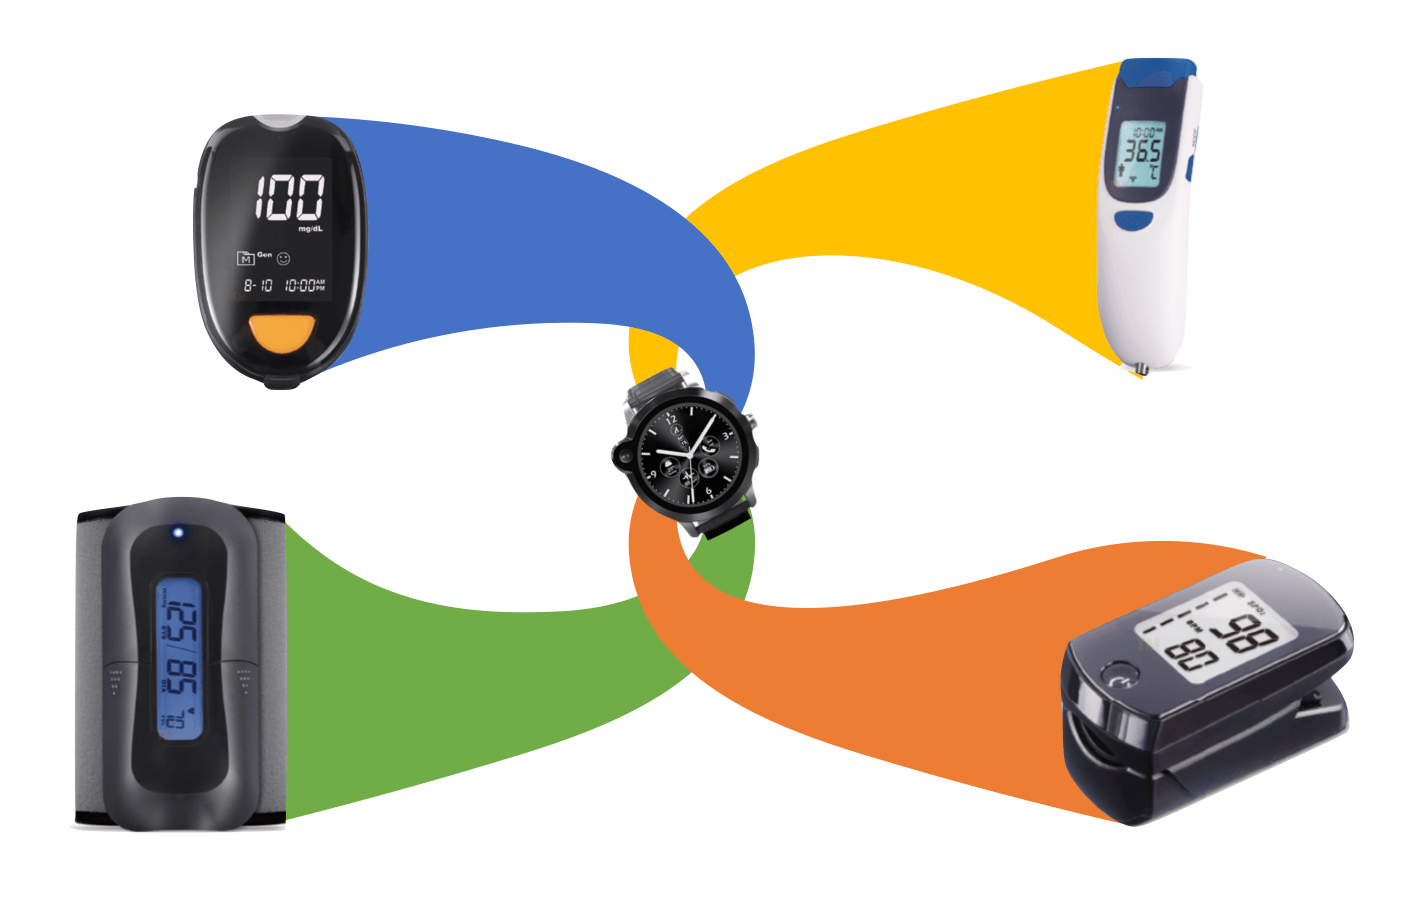 Telehealth connect medeical devices LooK Watch II mPERS Smartwatch